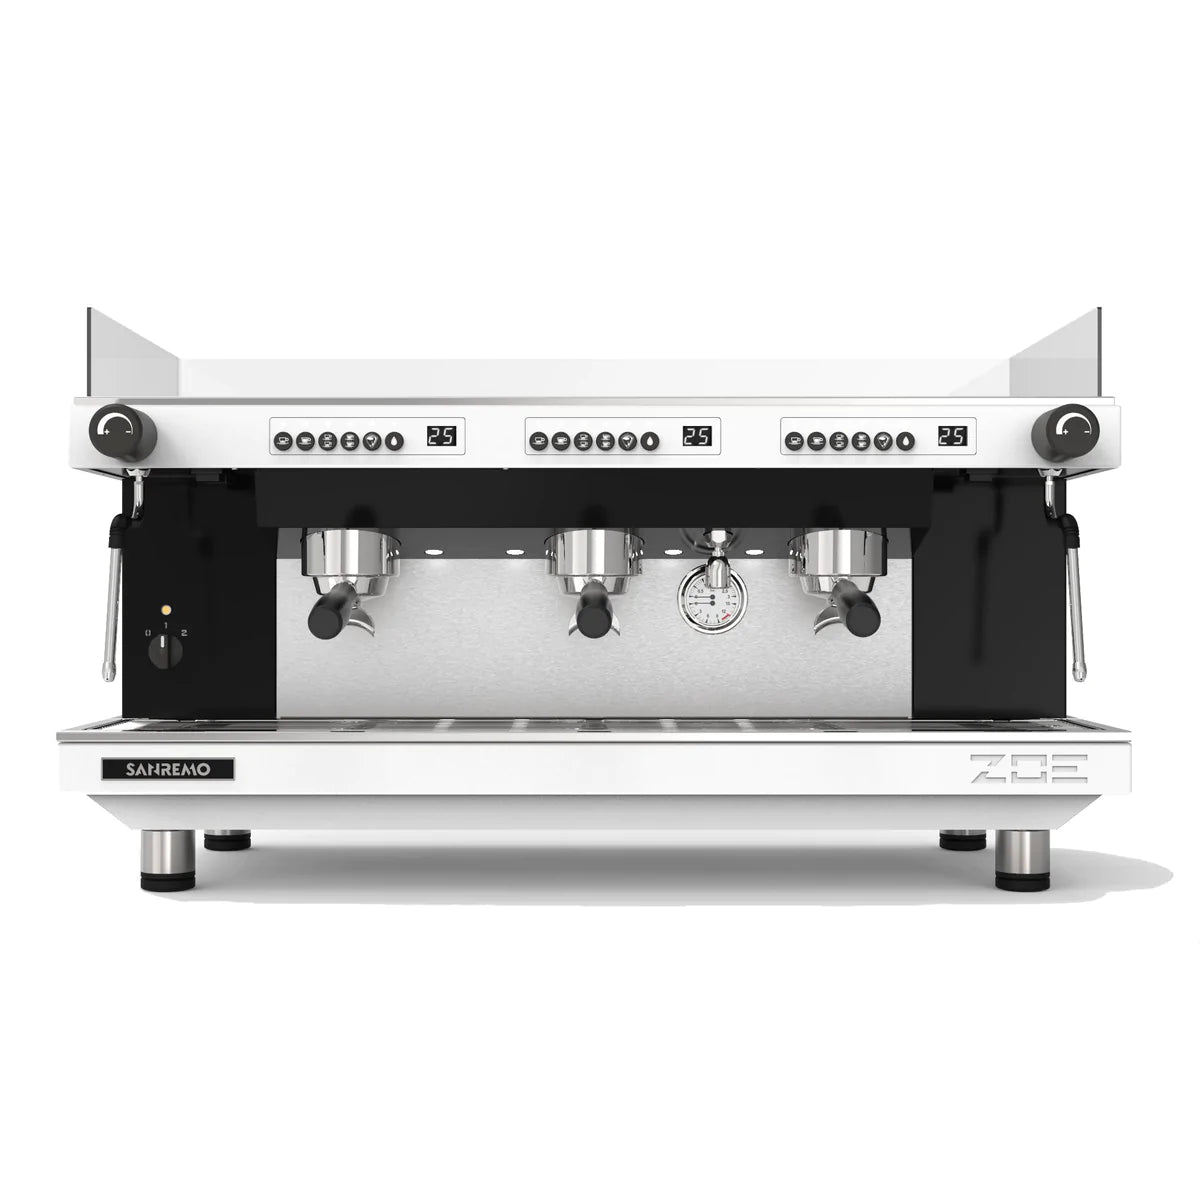 Sanremo 2 &amp; 3 Group Zoe Competition